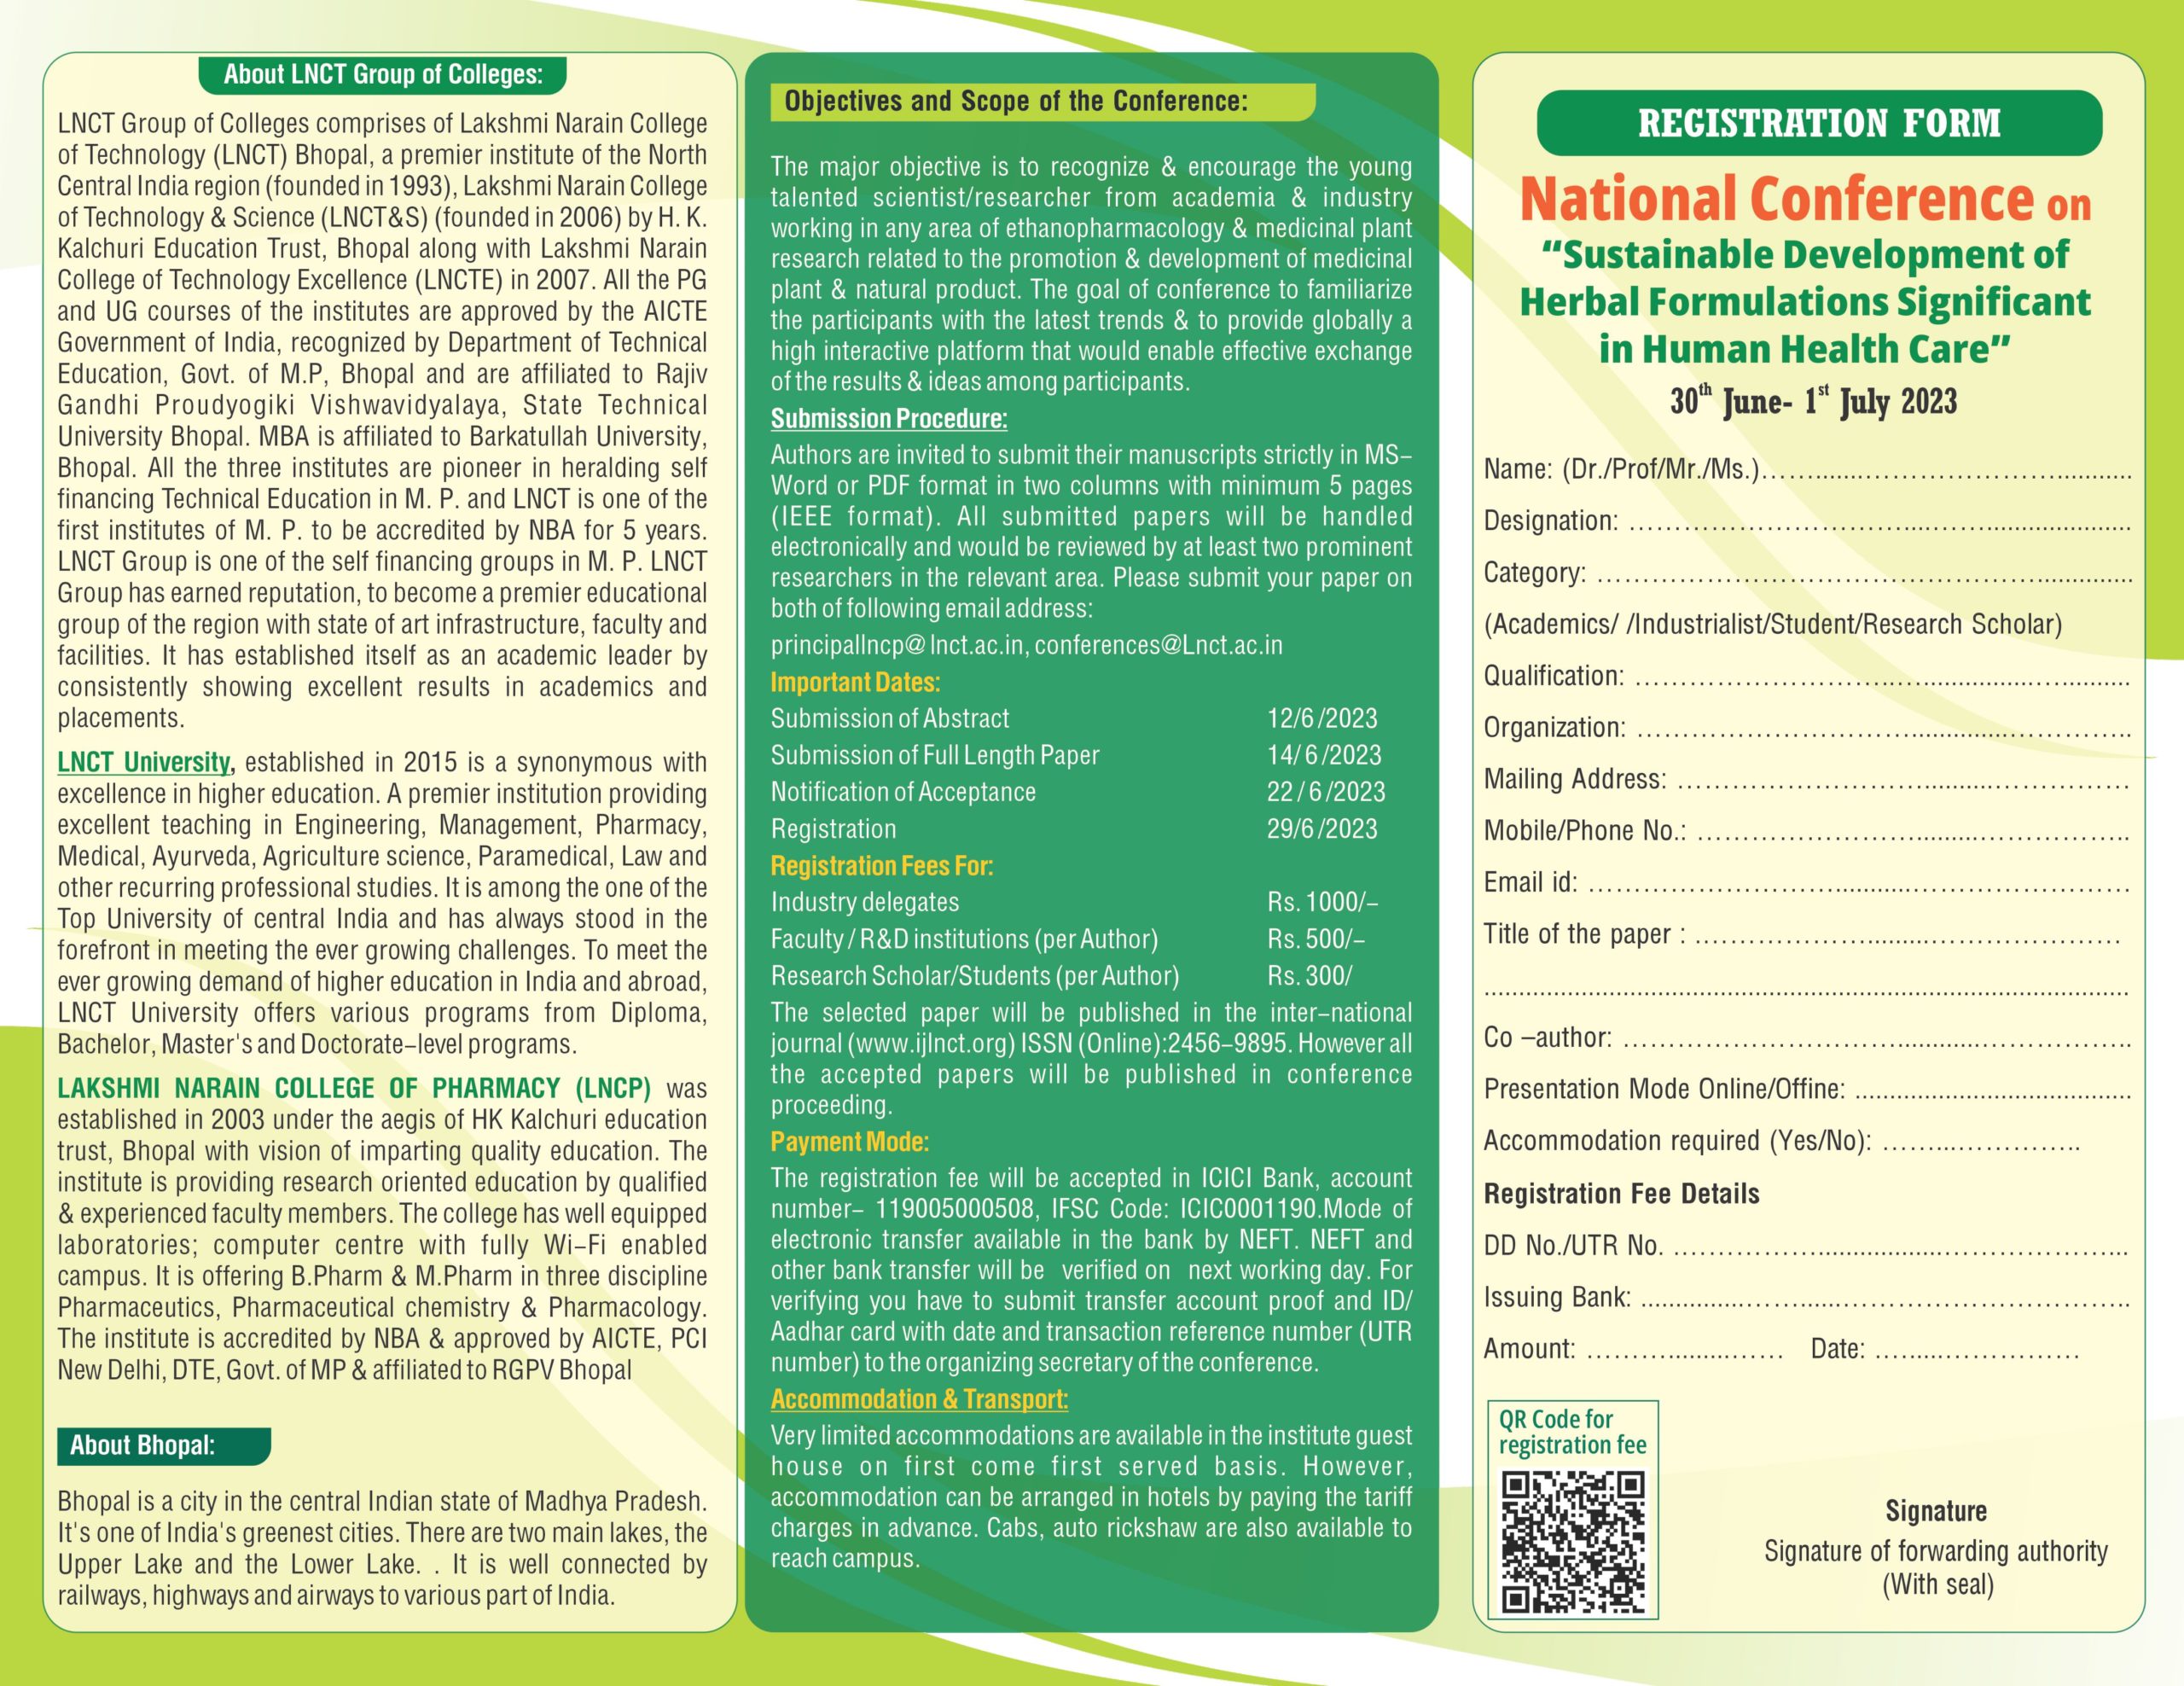 National Conference on Sustainable Development of Herbal Formulations Significant in Human Health Care 1